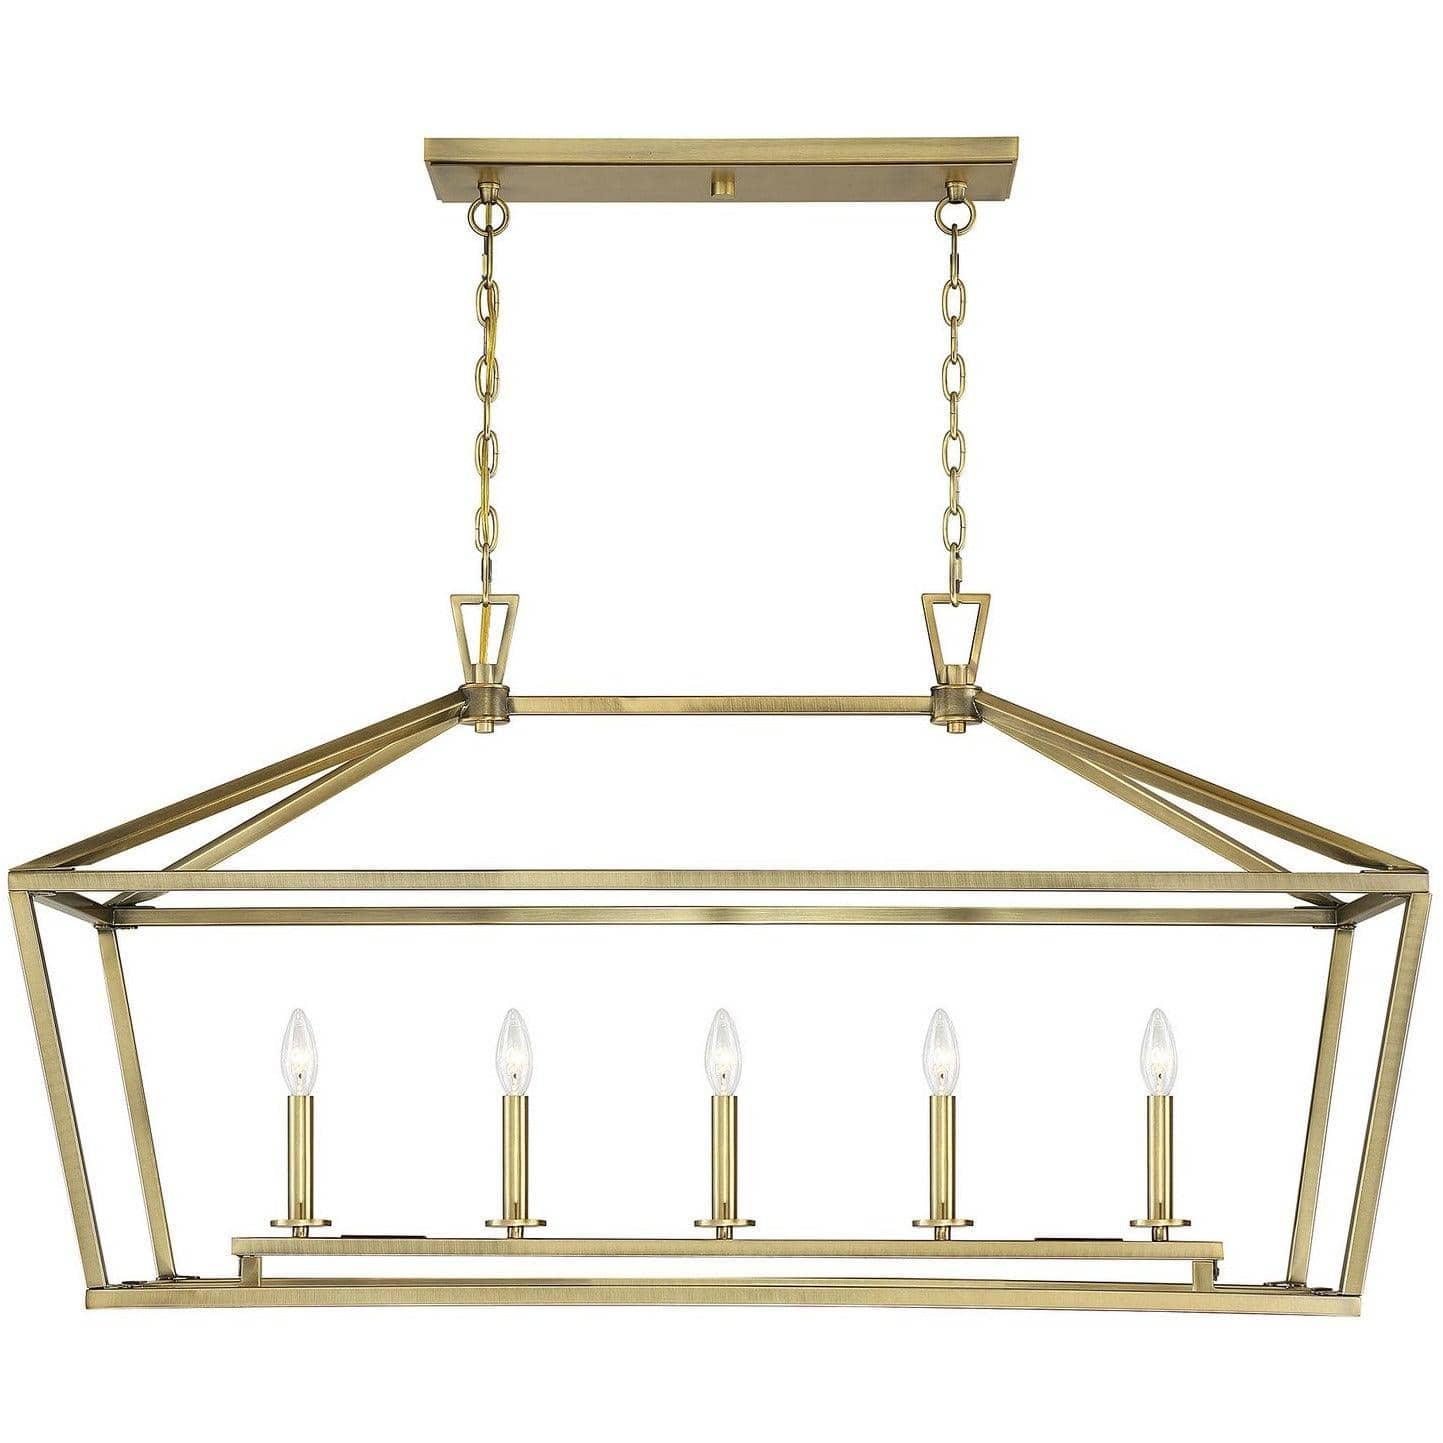 Savoy House - Townsend Five Light Linear Chandelier - 1-324-5-322 | Montreal Lighting & Hardware